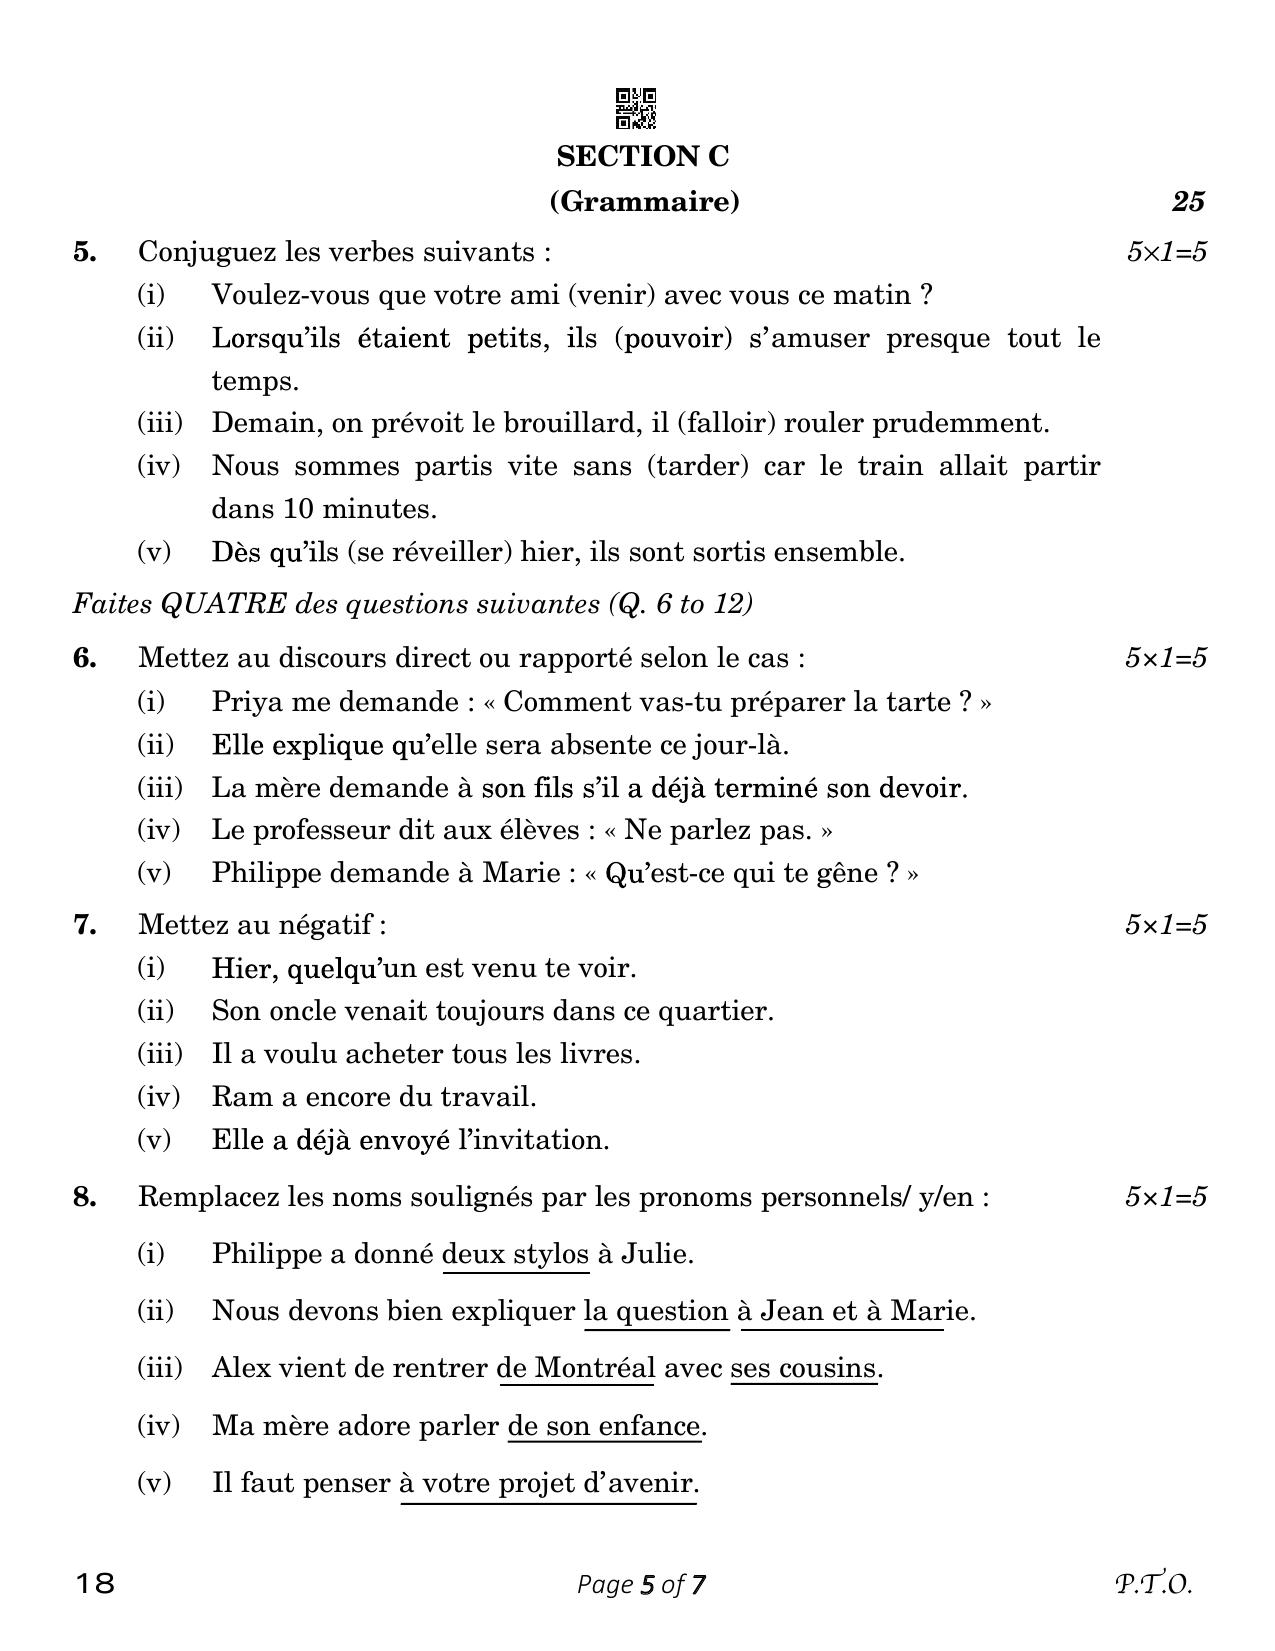 CBSE Class 12 French (Compartment) 2023 Question Paper - Page 5